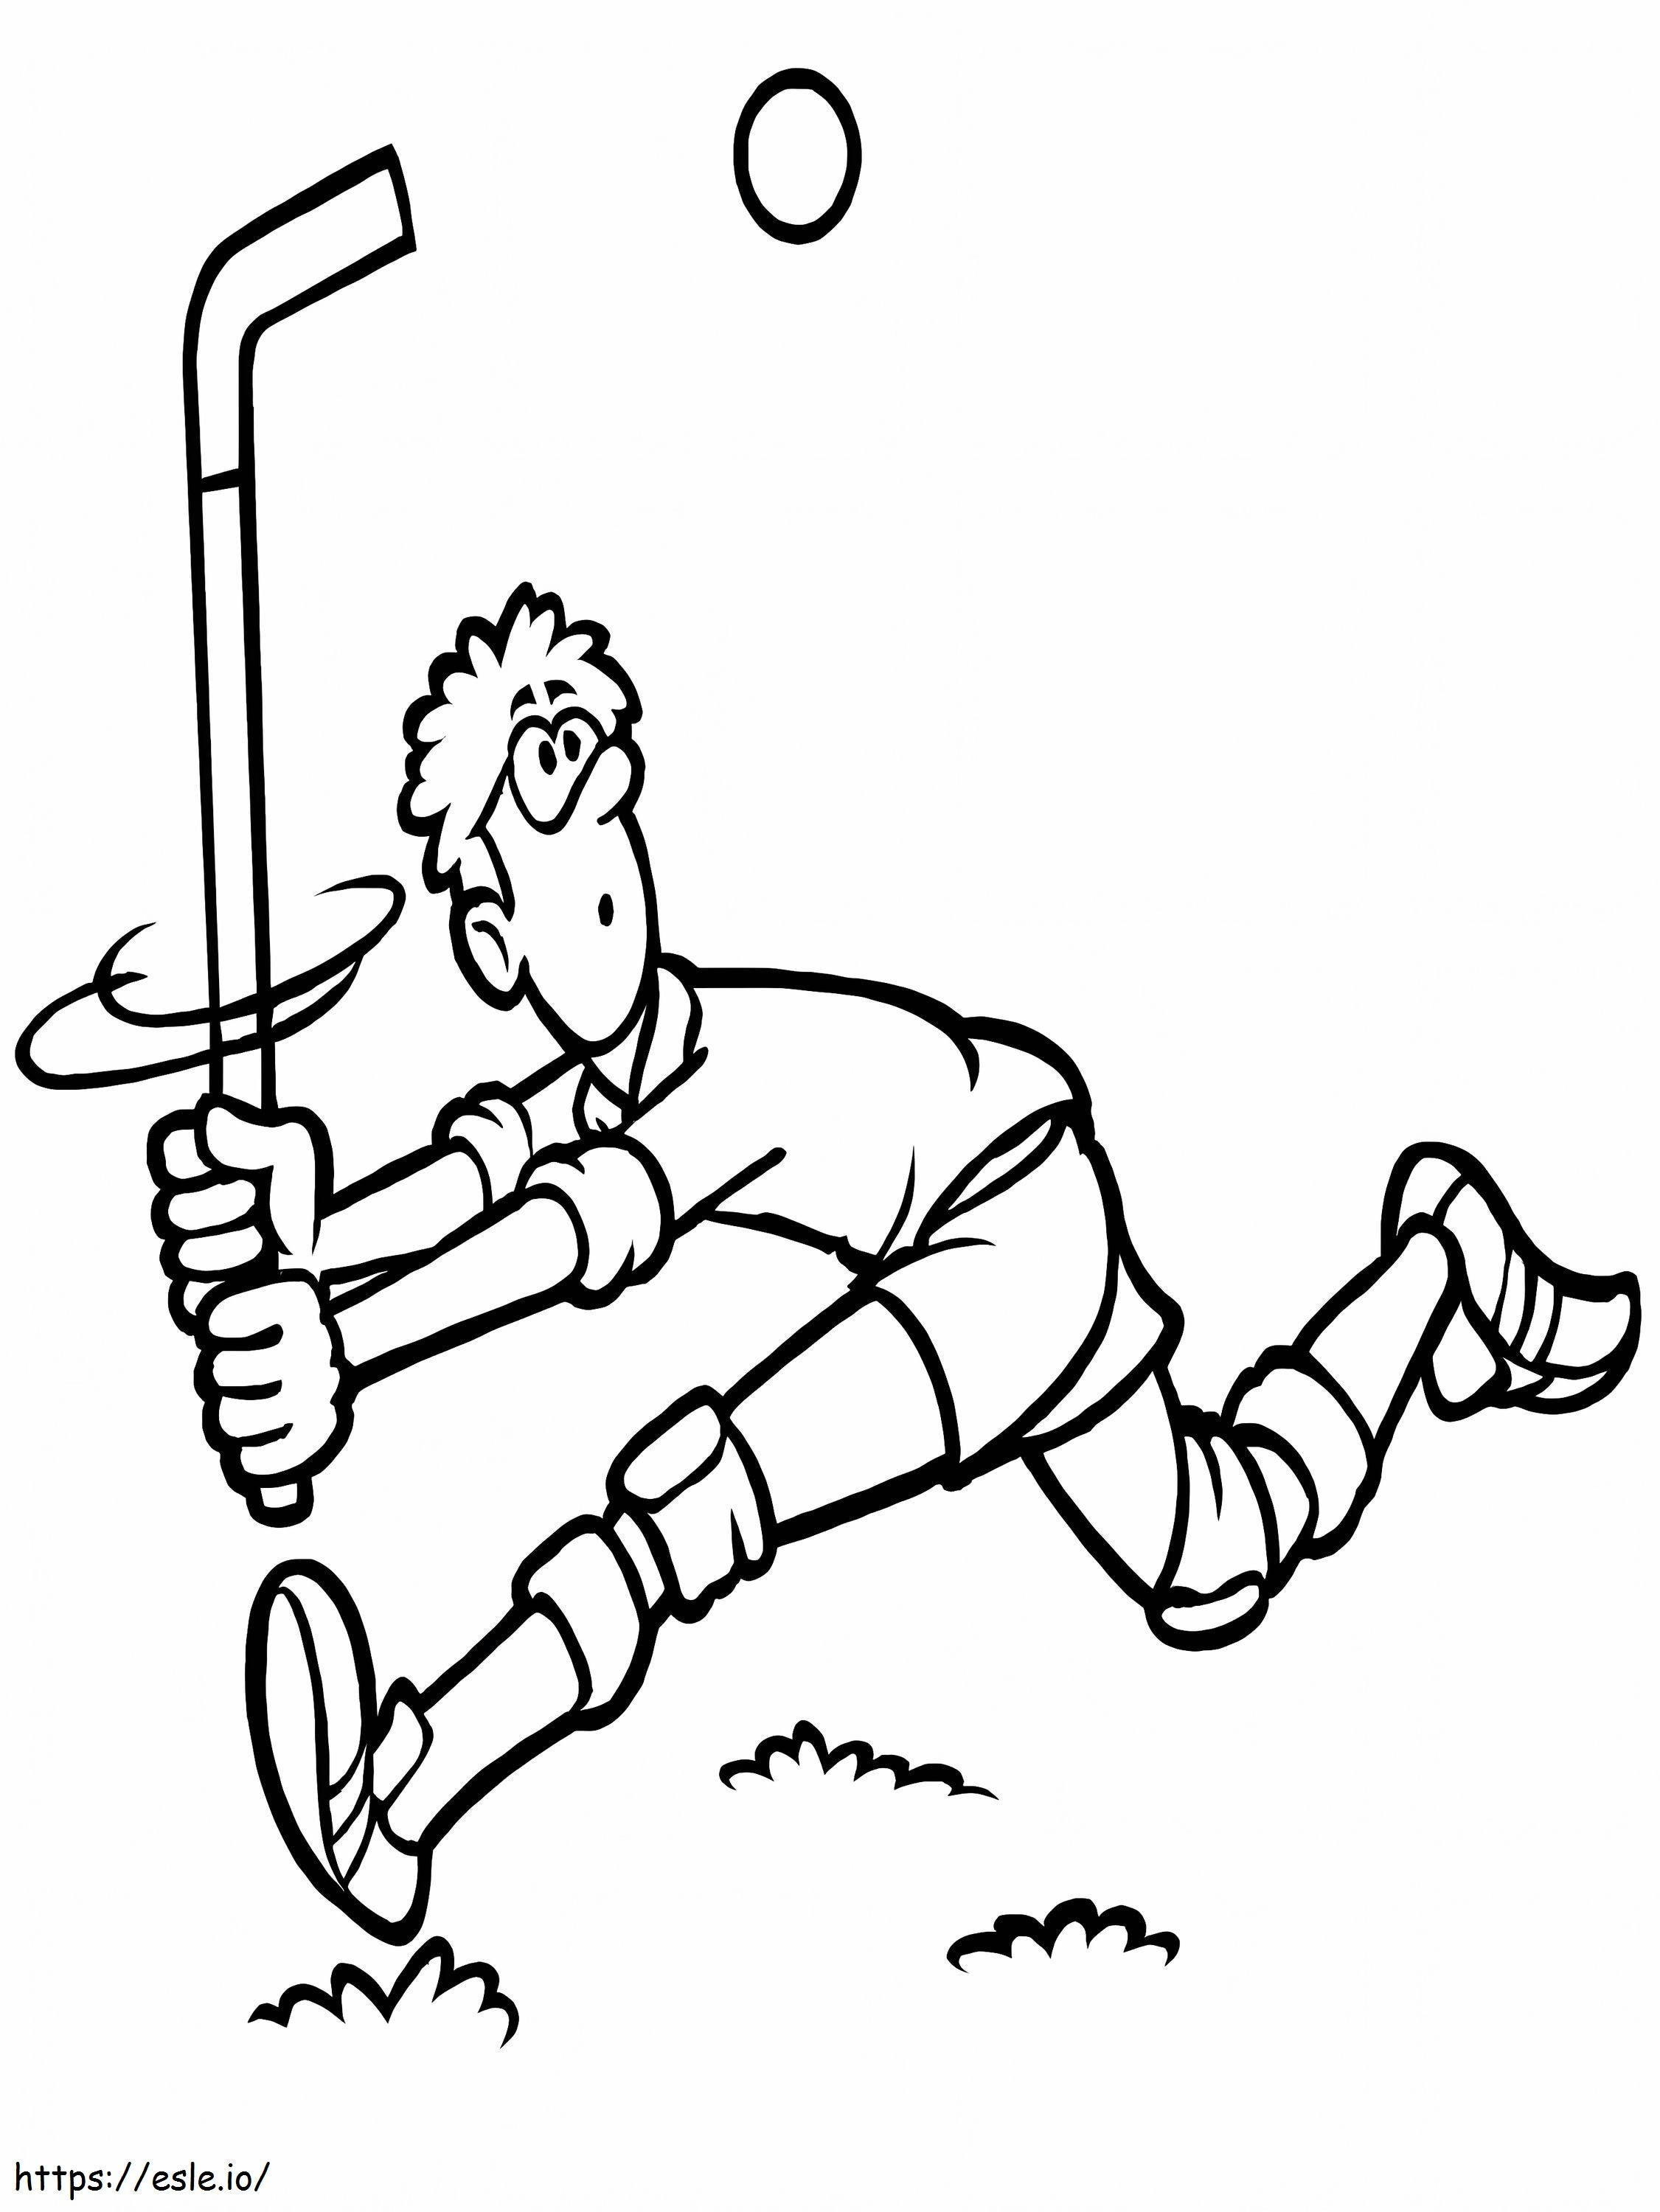 Funny Hockey Players coloring page